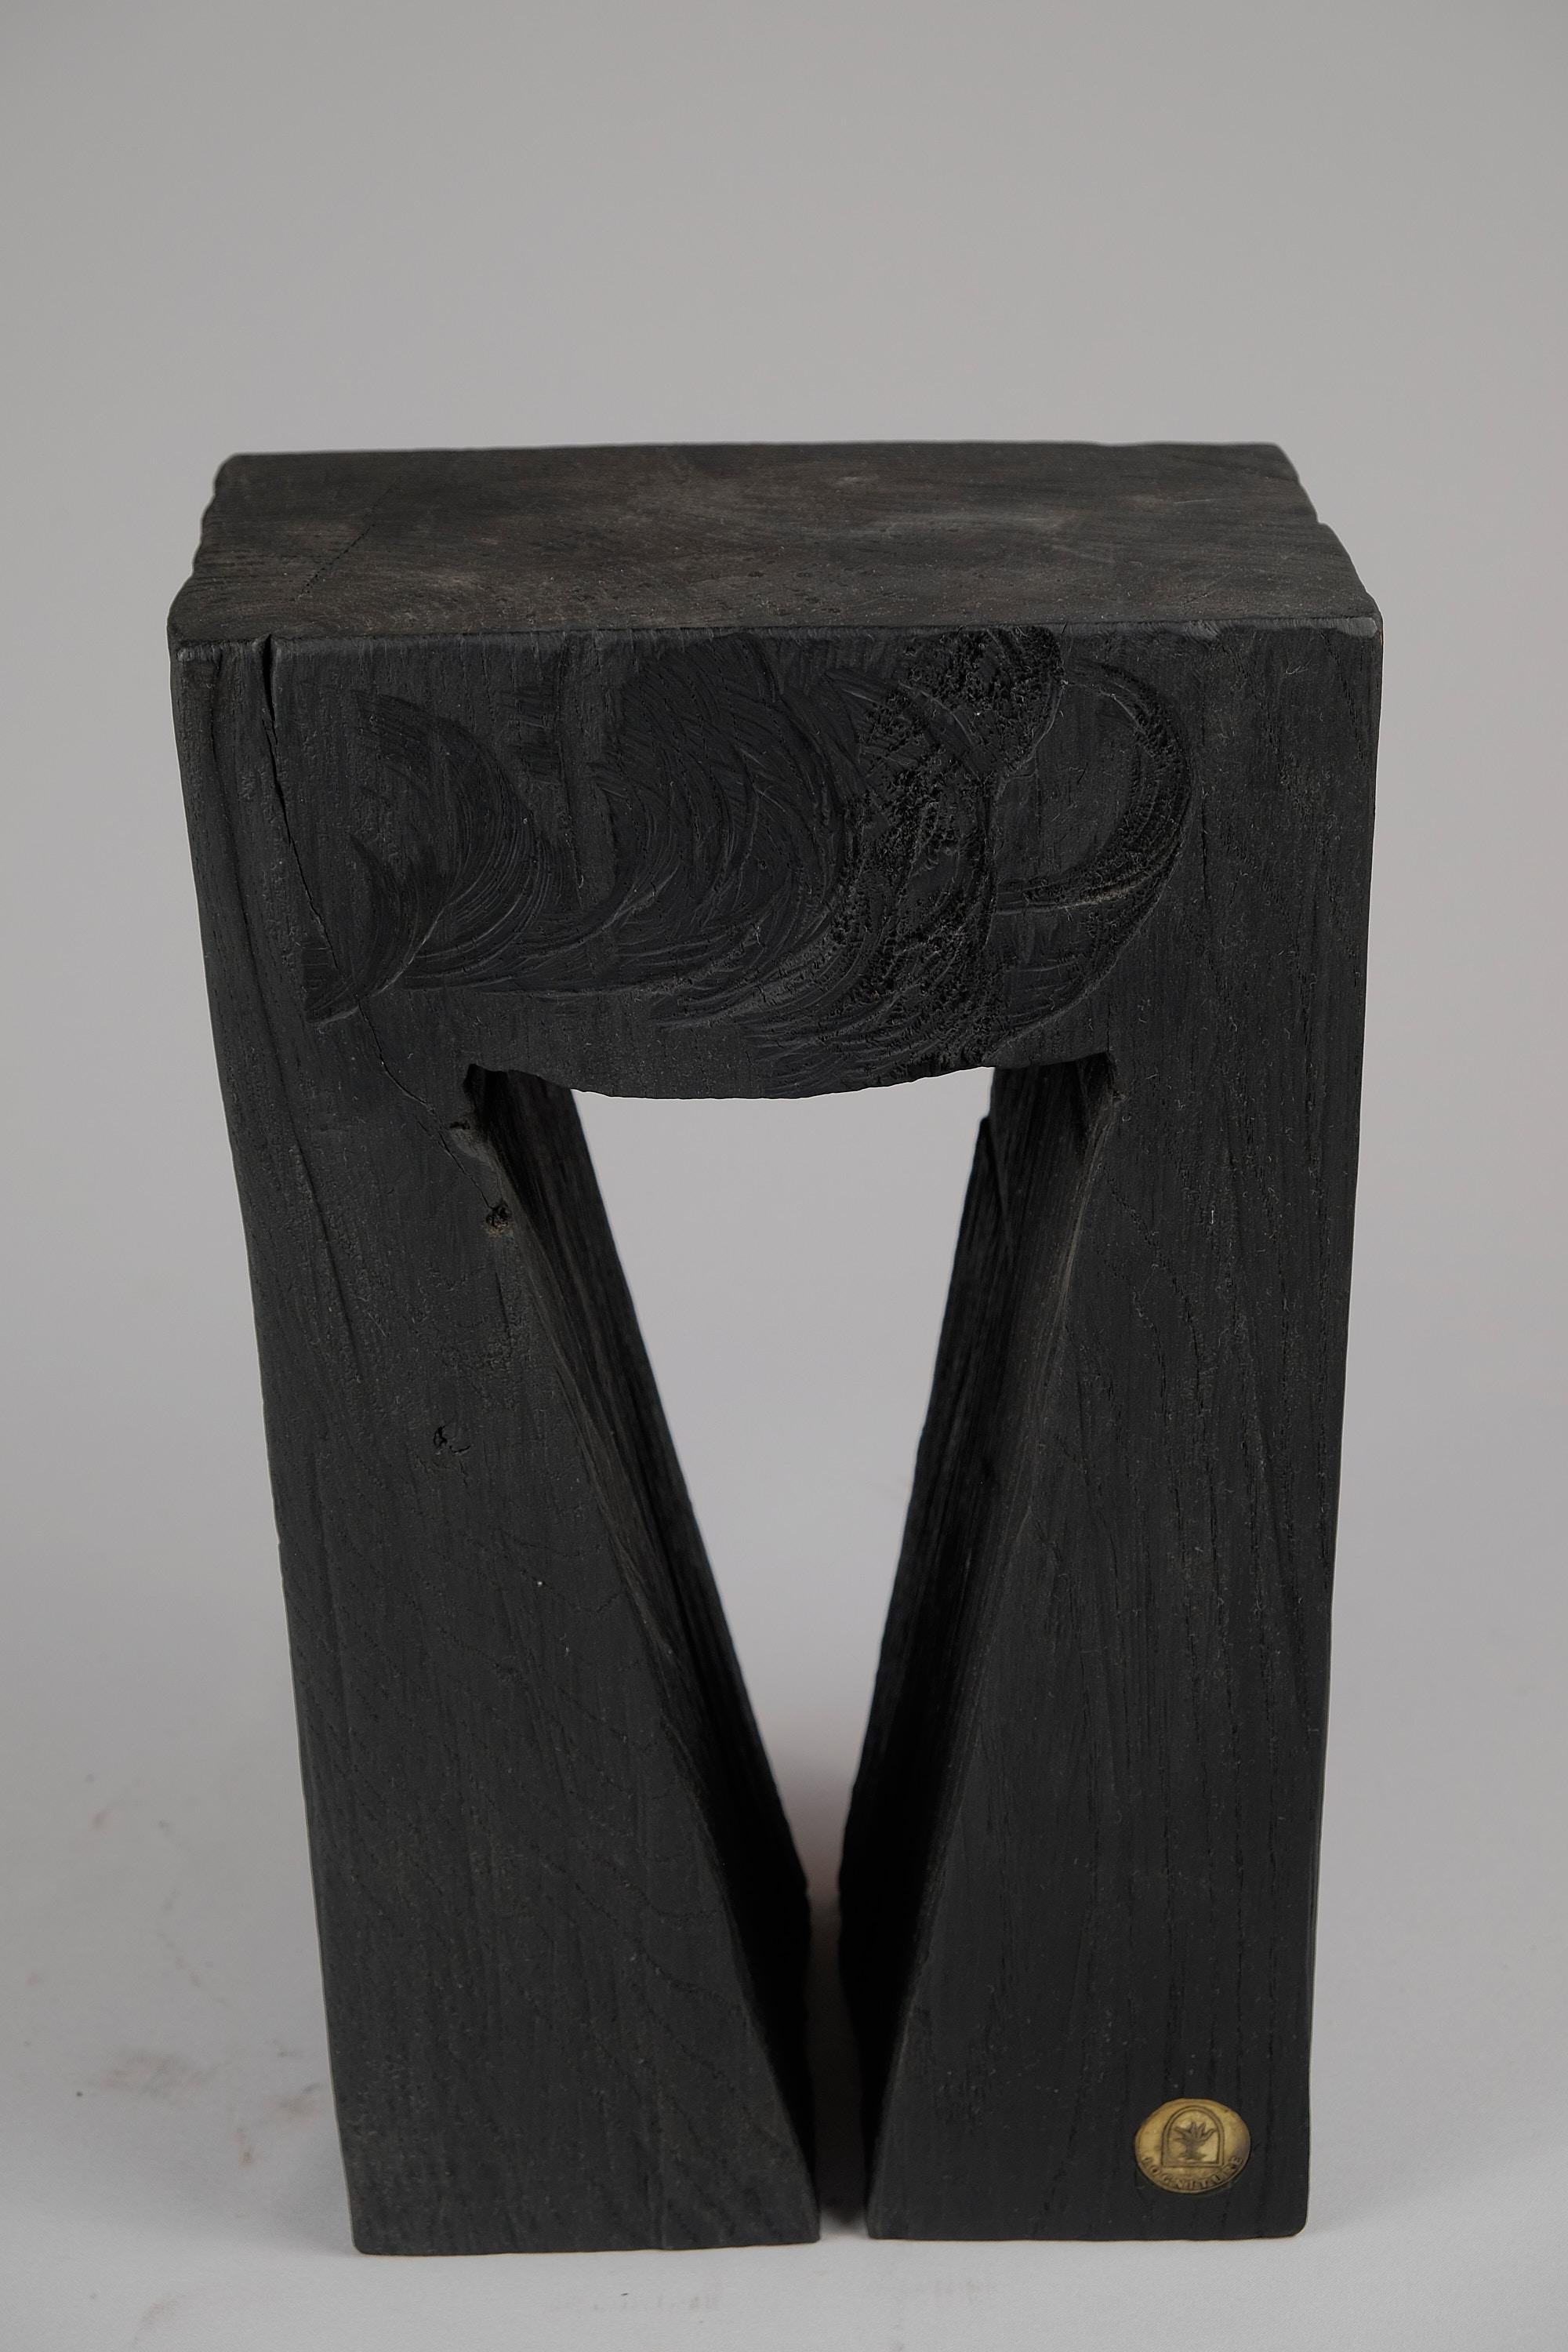 Unique chainsaw carved wooden contemporary rustic side table. Carved from a single piece of wood and protected with the highest quality oils, ensuring durability for generations. Such unique handmade design will highlight your interior and bring